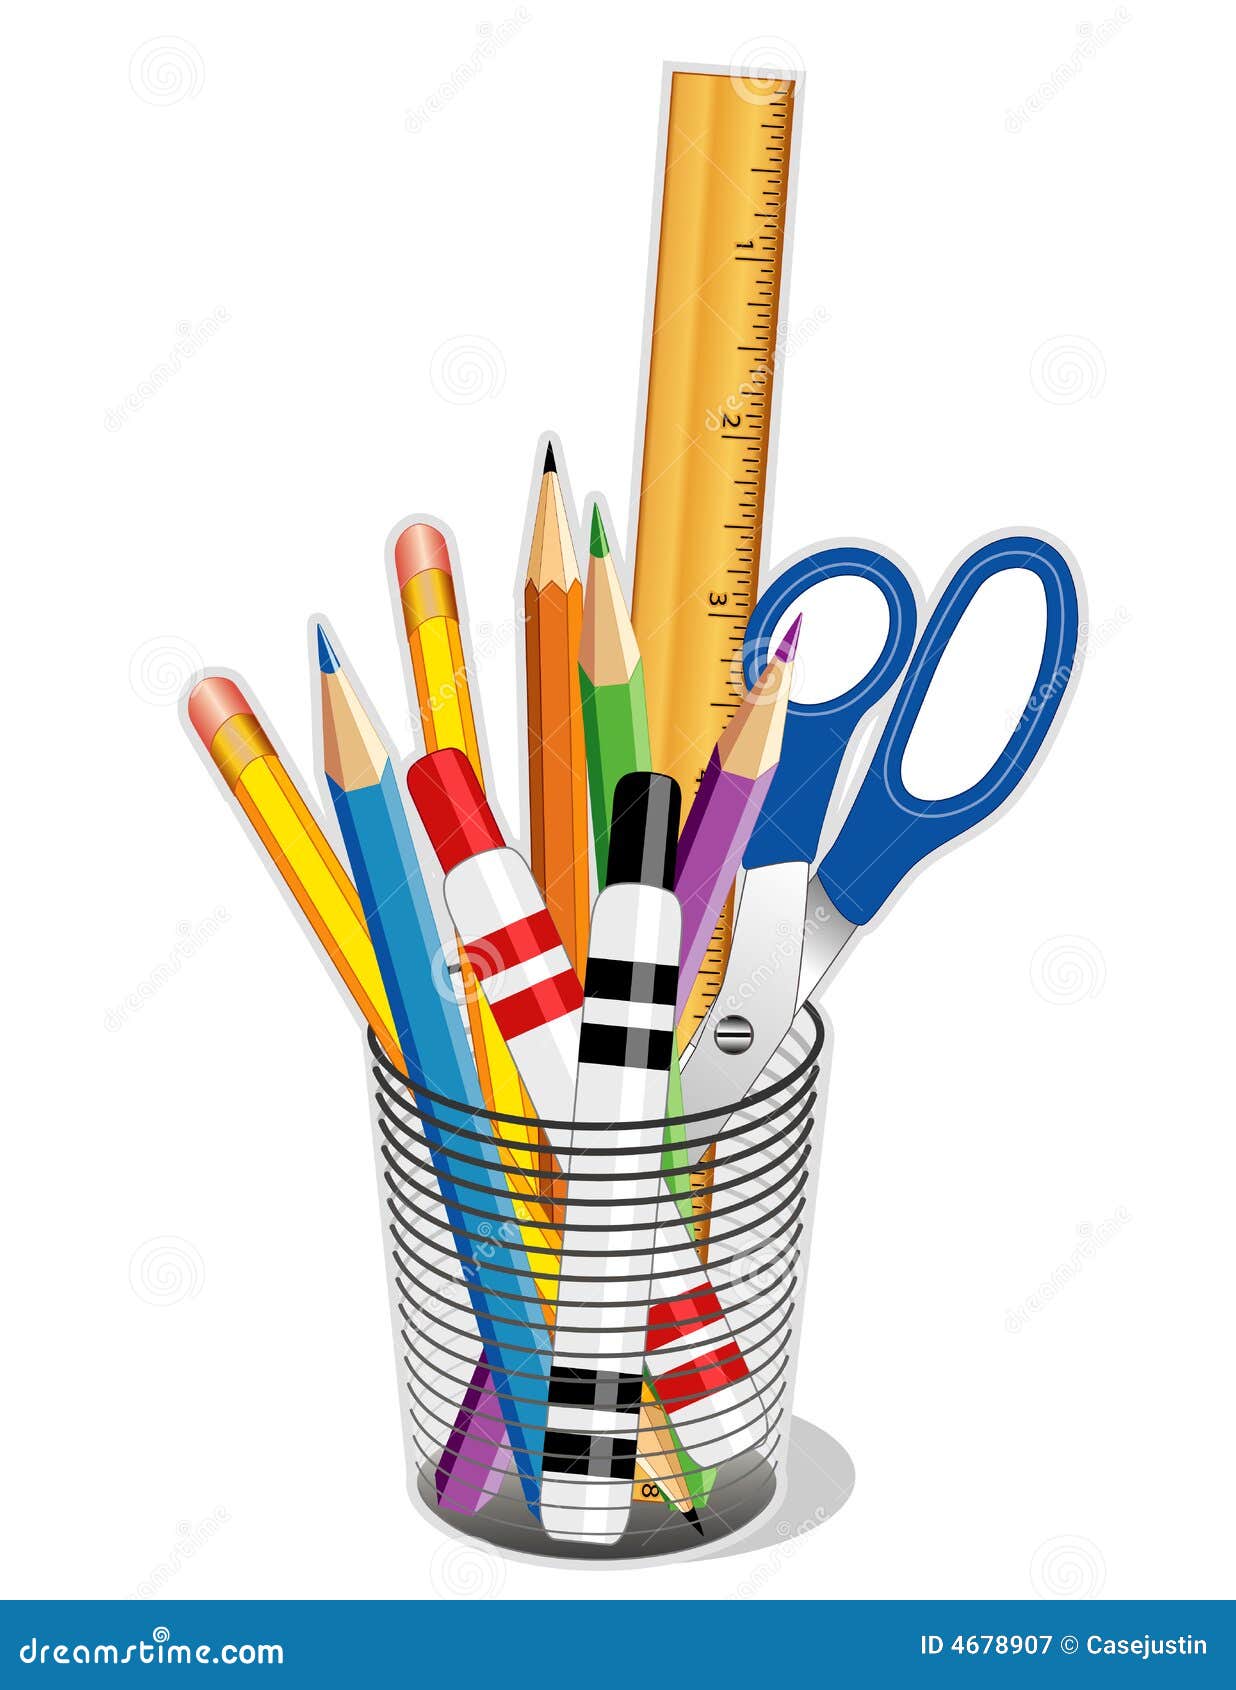 drawing tools clipart - photo #11